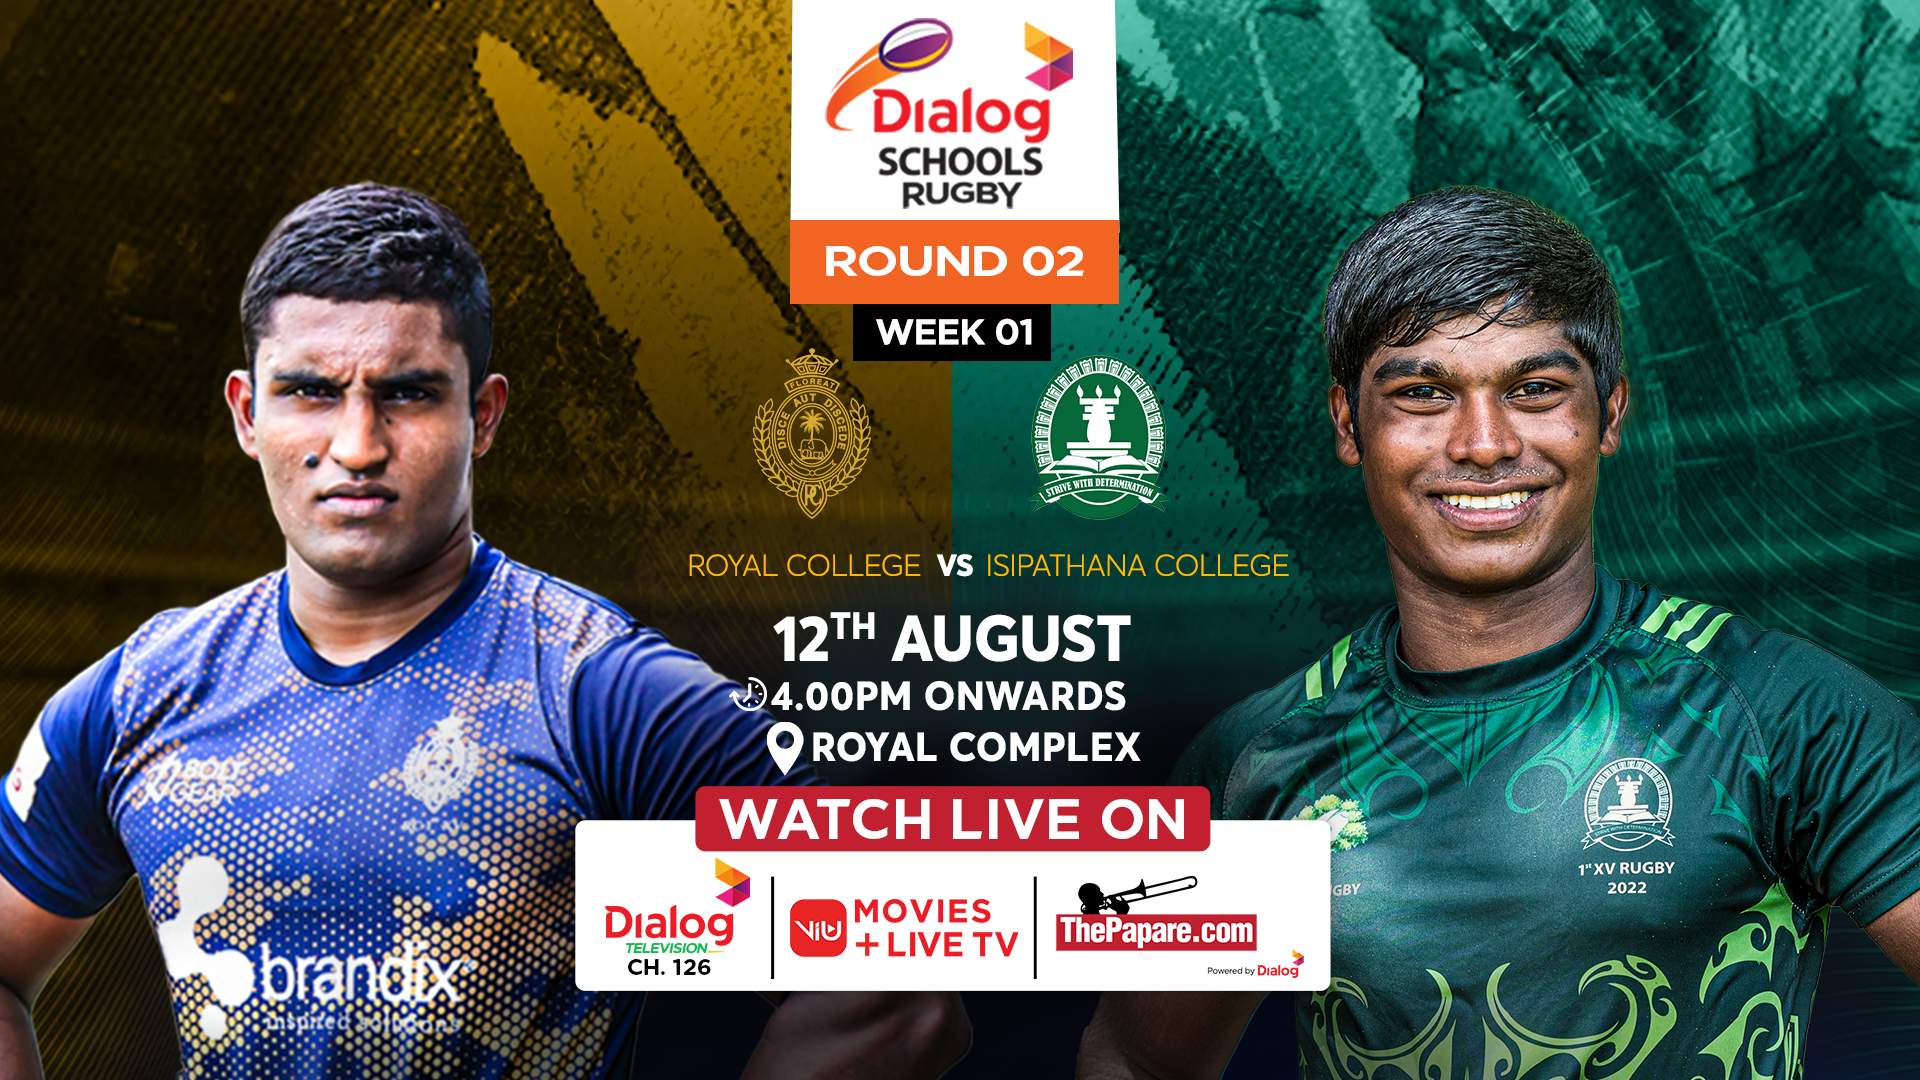 REPLAY - Royal College vs Isipathana College - Dialog Schools Rugby League 2023